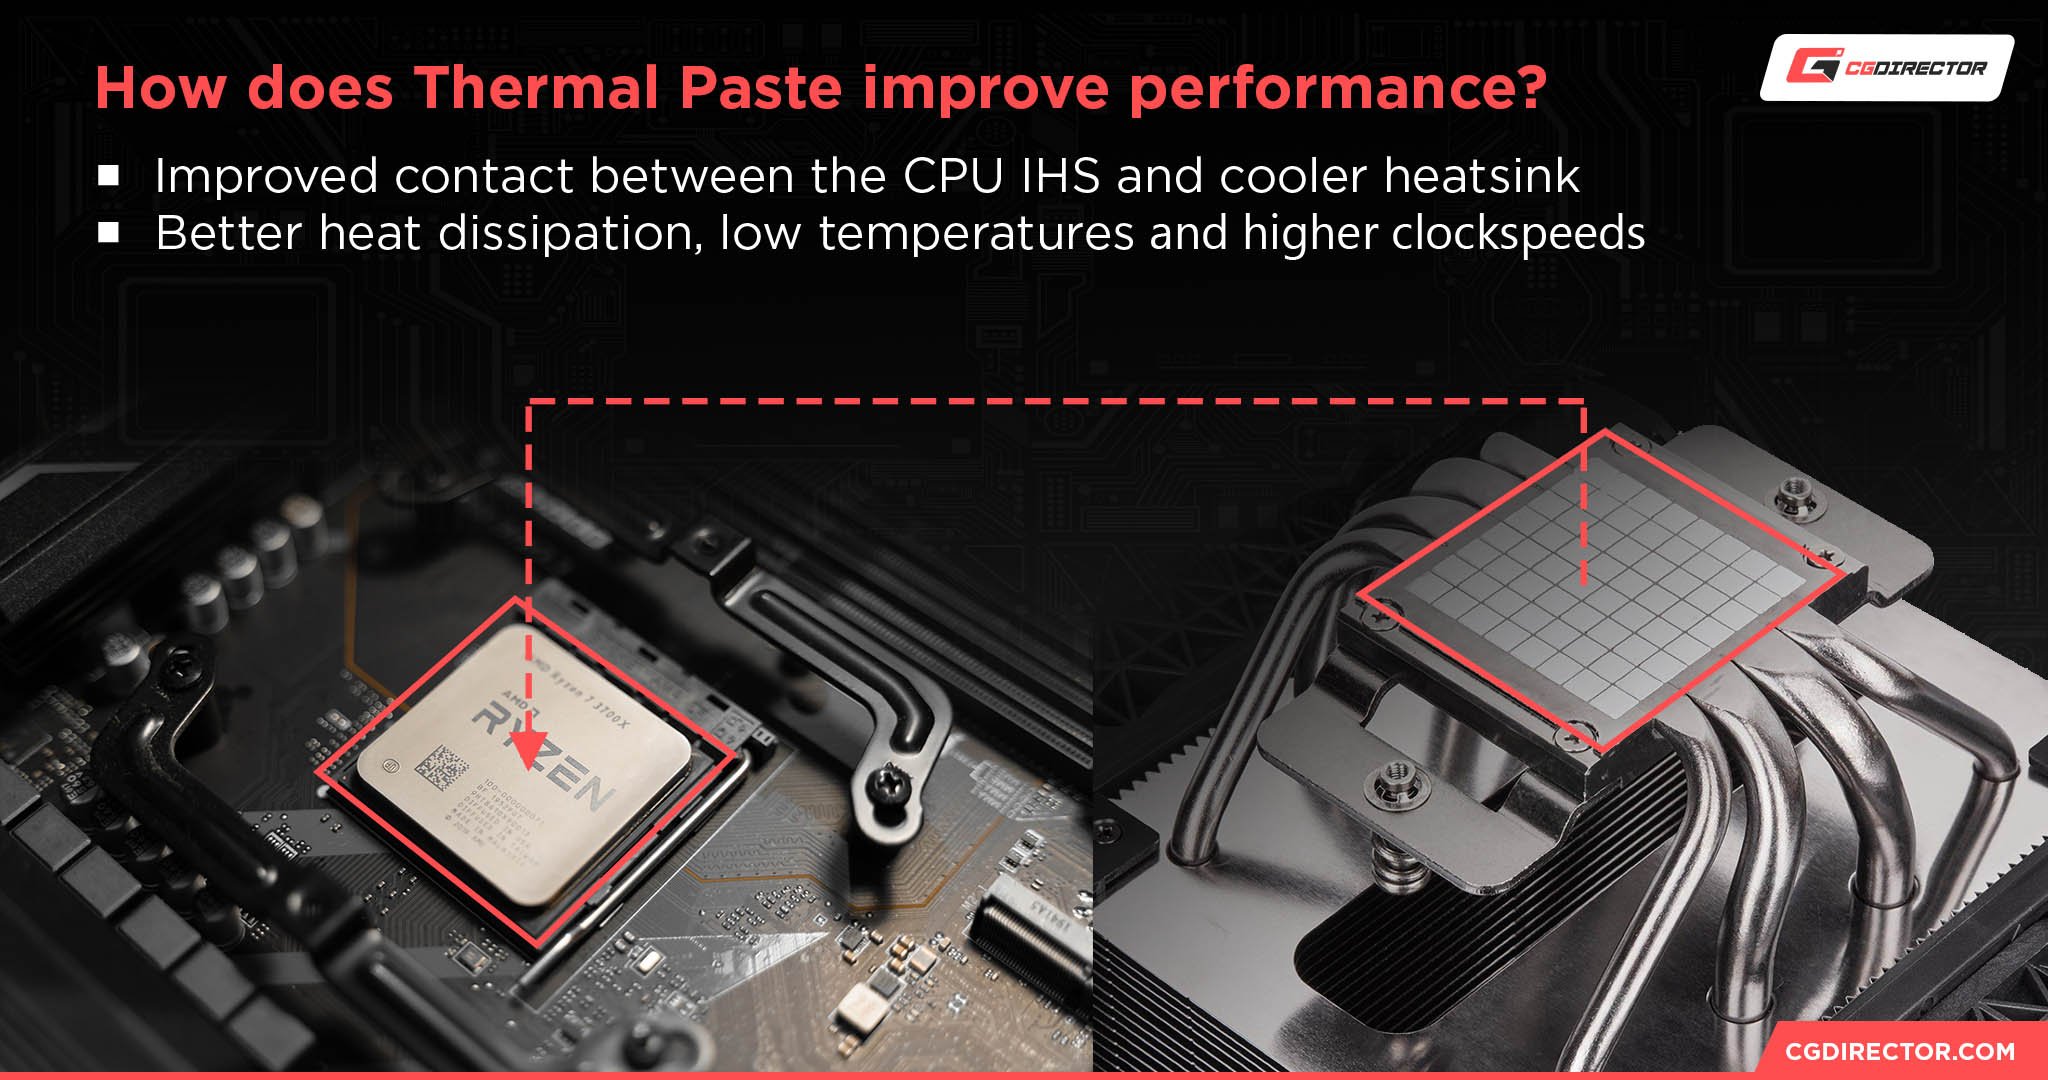 How does Thermal Paste improve performance